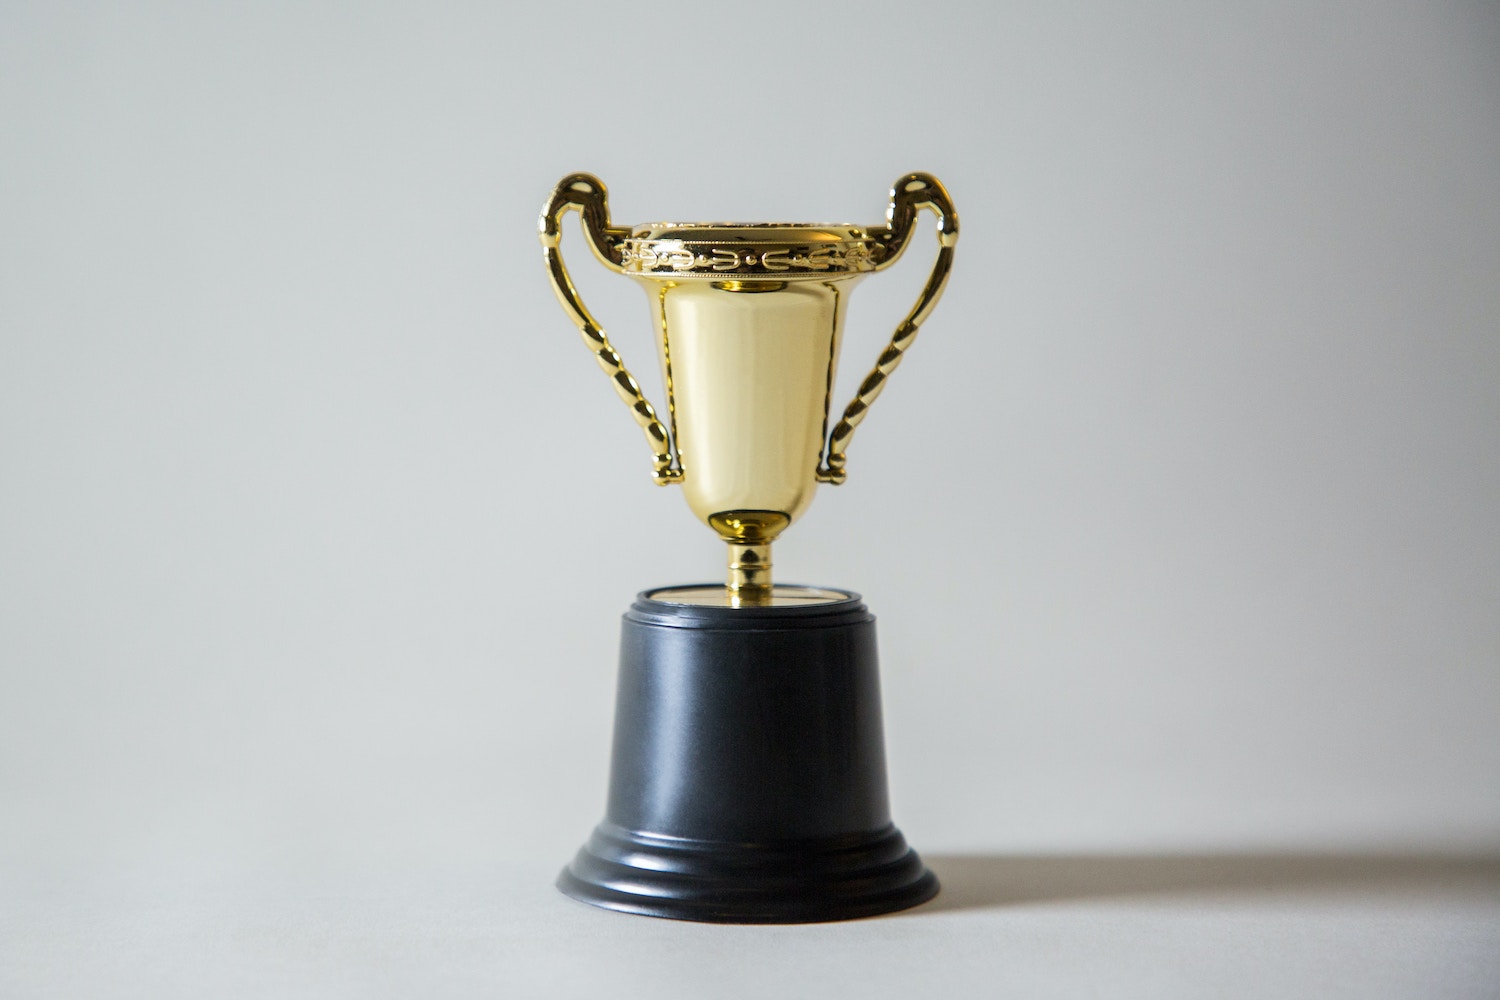 A picture of an award